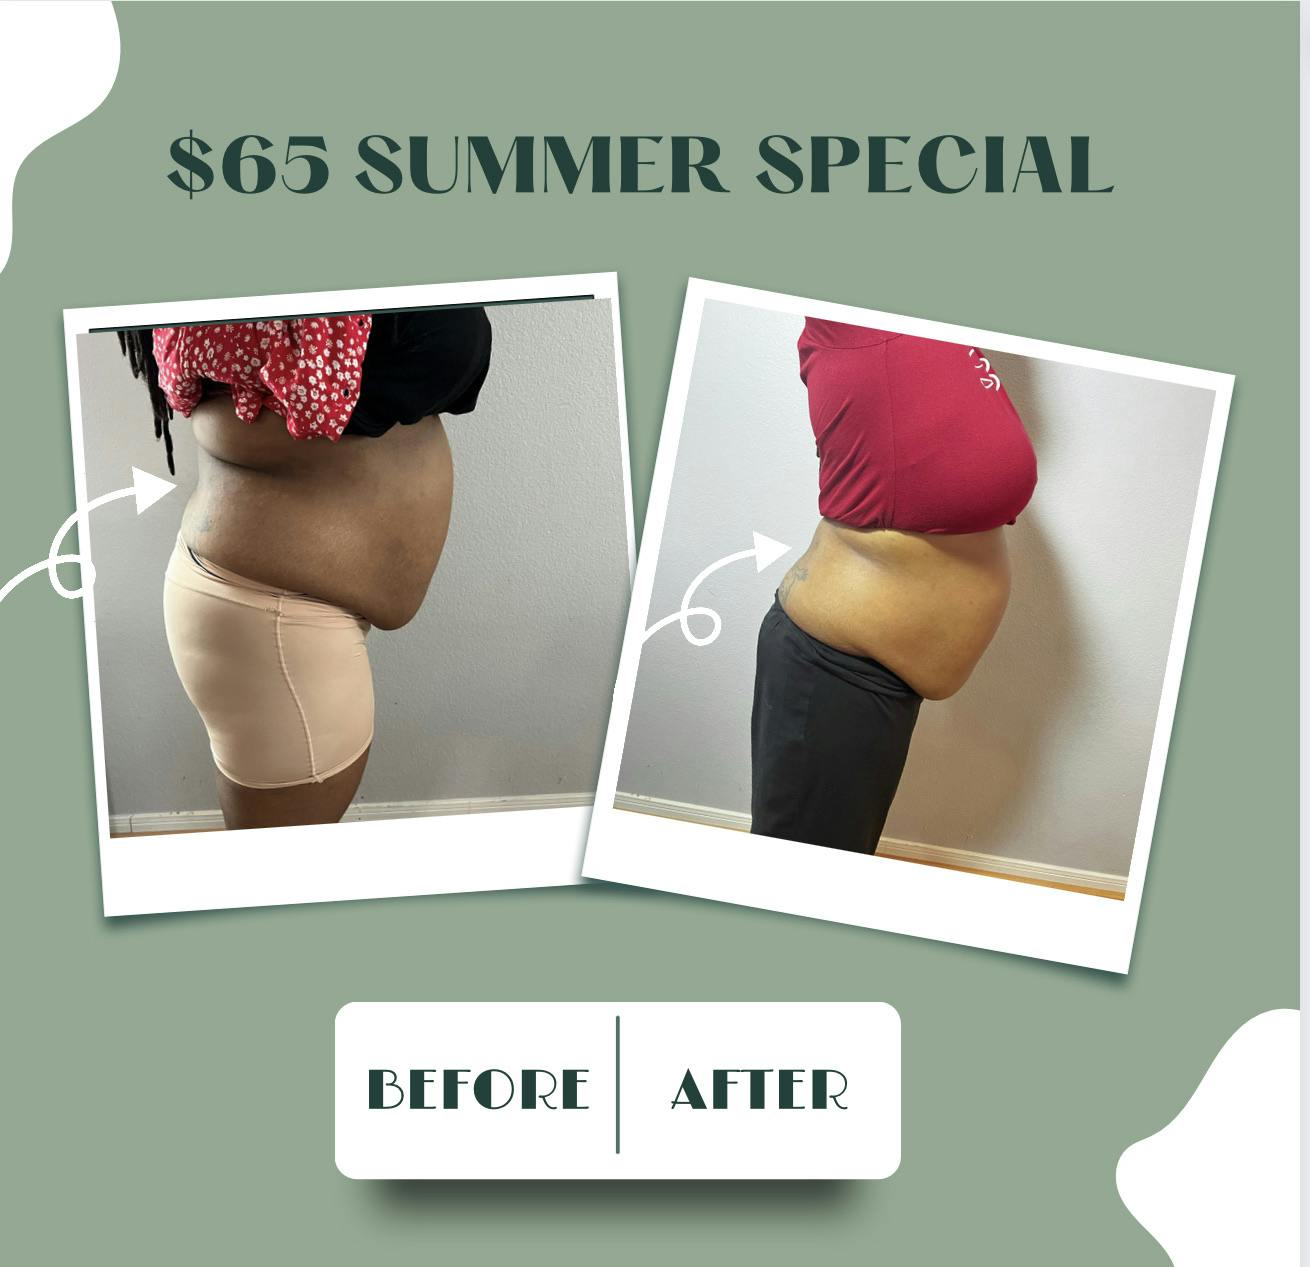 All services $65 summer special